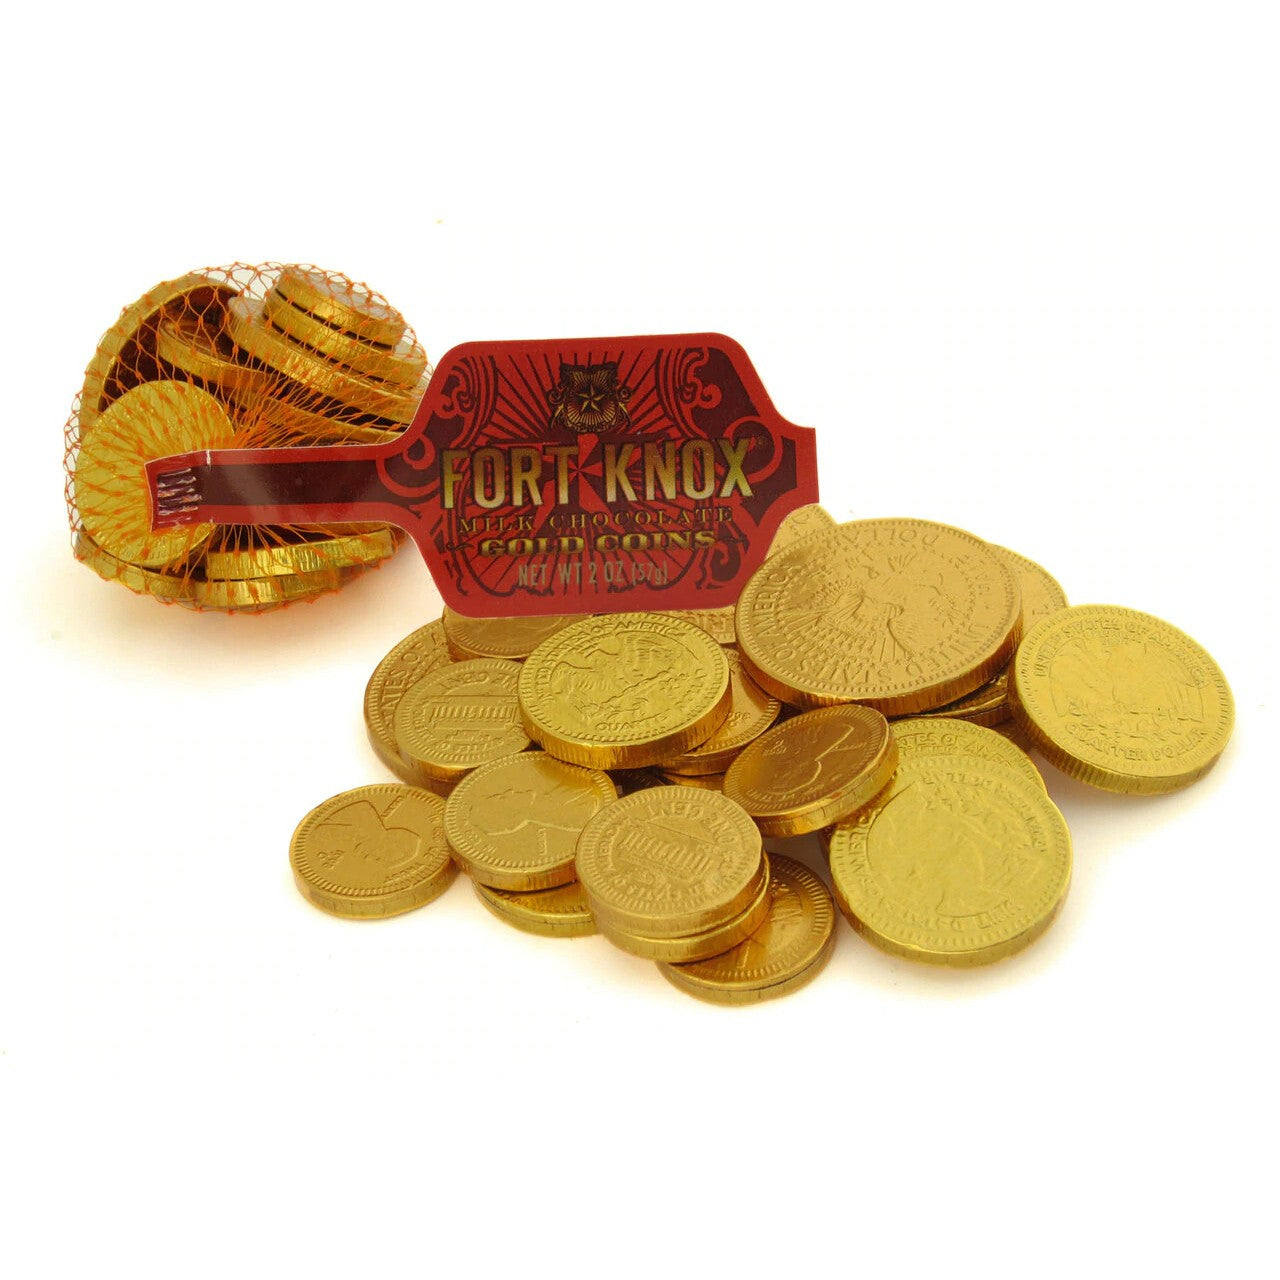 Fort Knox Milk Chocolate Coins